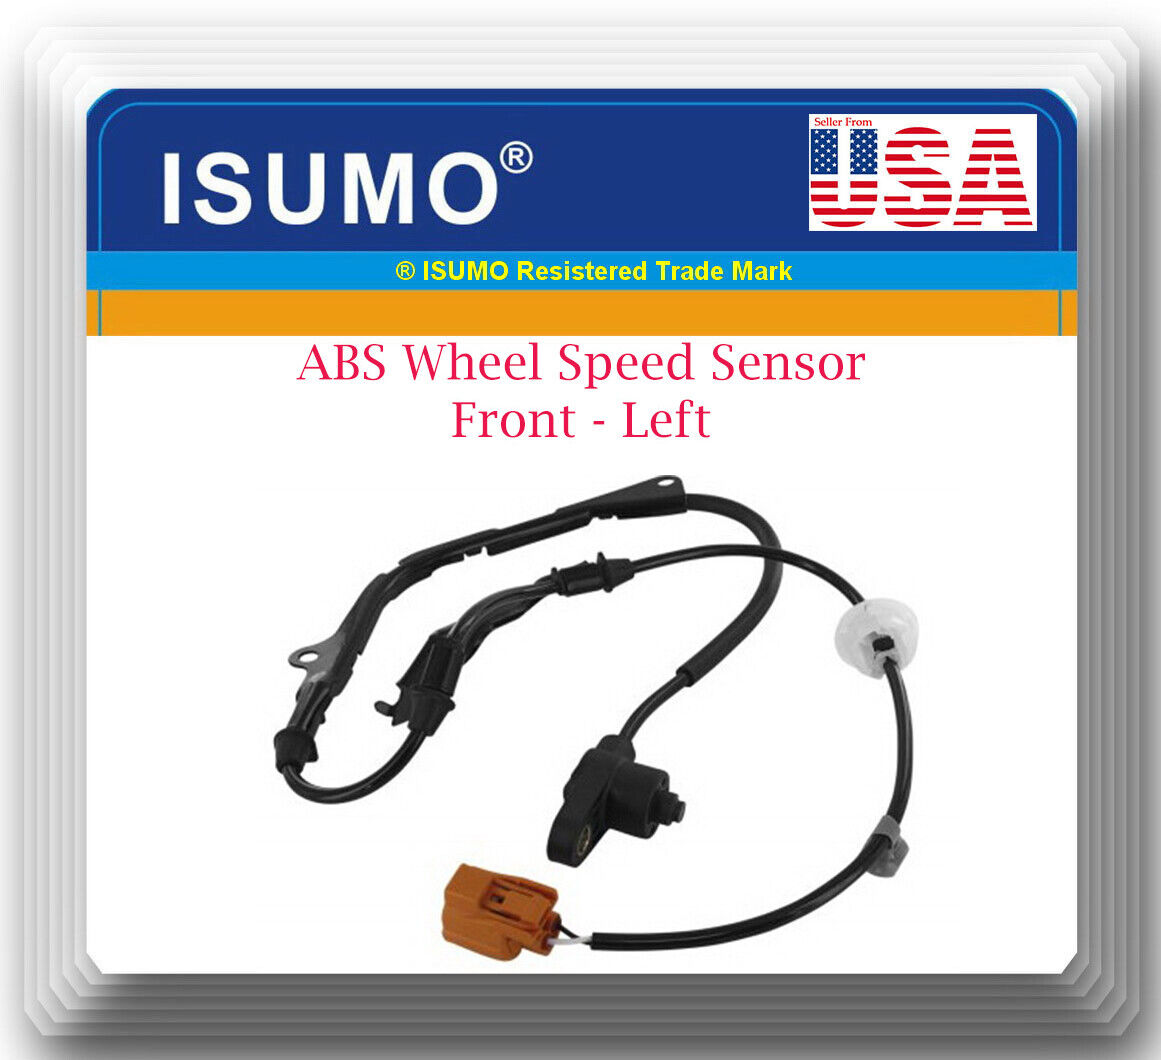 ABS Wheel Speed Sensor Front Left For CL 2001-2003 TL 1999-2003 Accord 98-2002